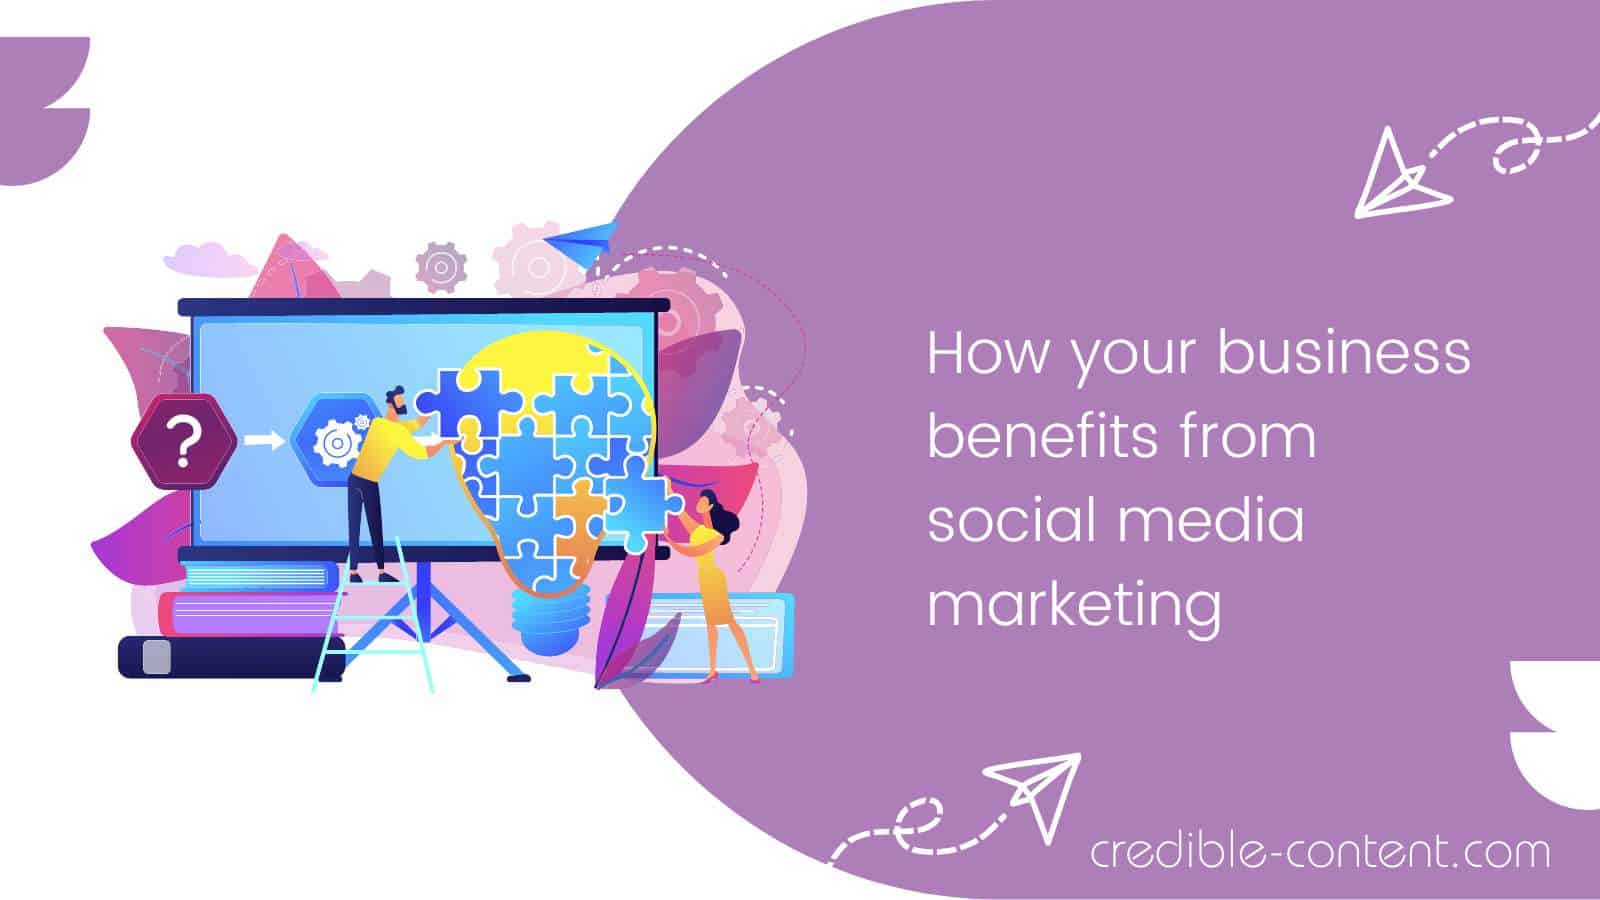 How your business benefits from social media marketing